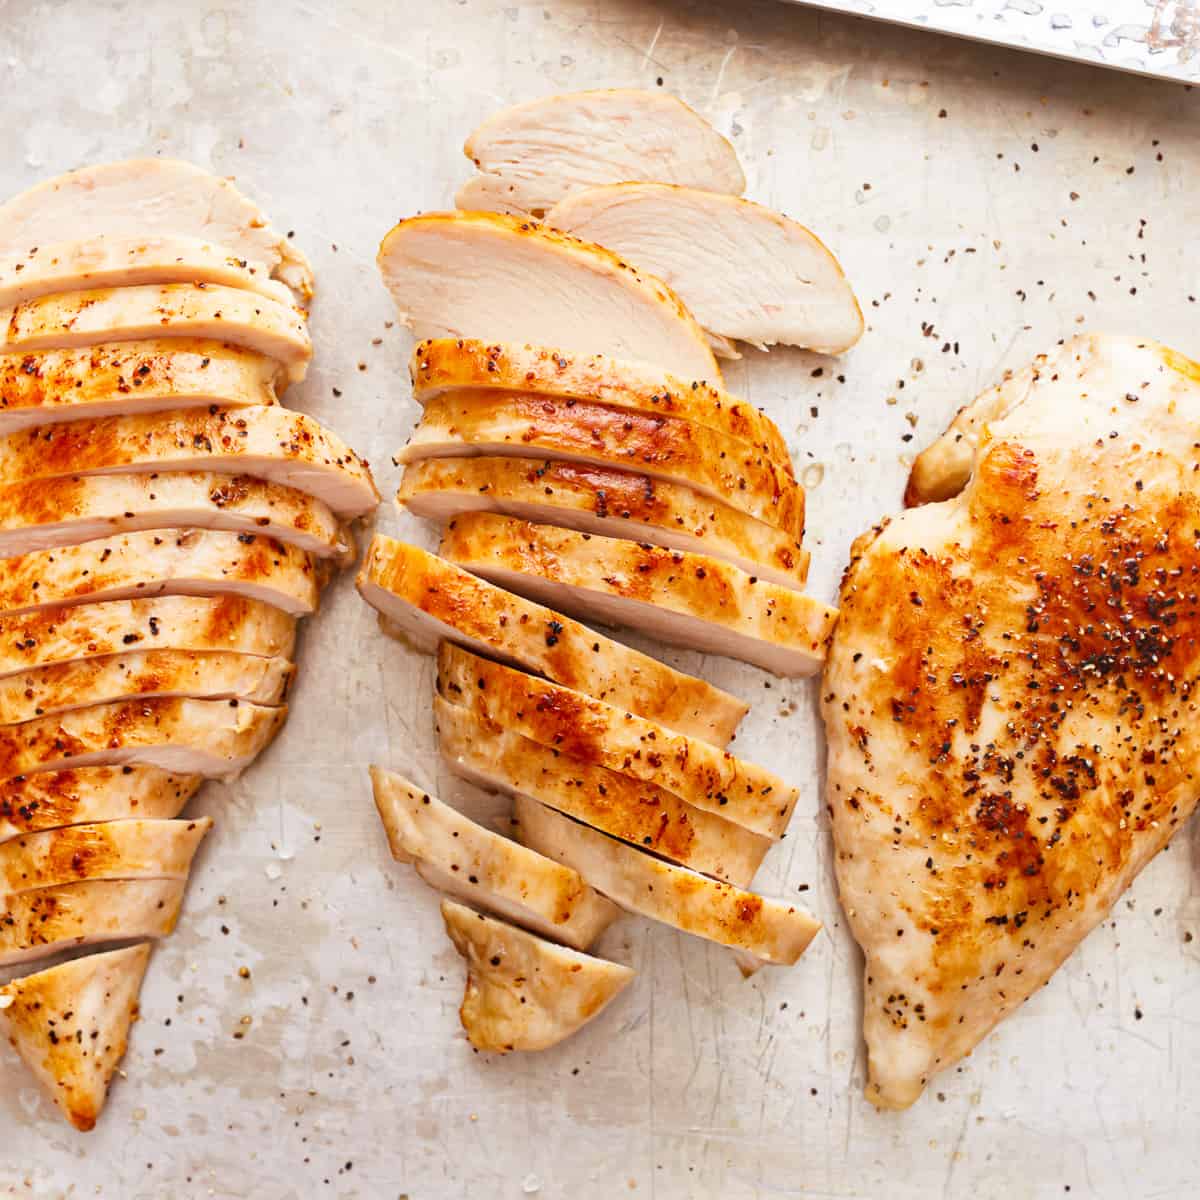 Pan Seared Oven Baked Chicken Breasts - 101 Cooking For Two